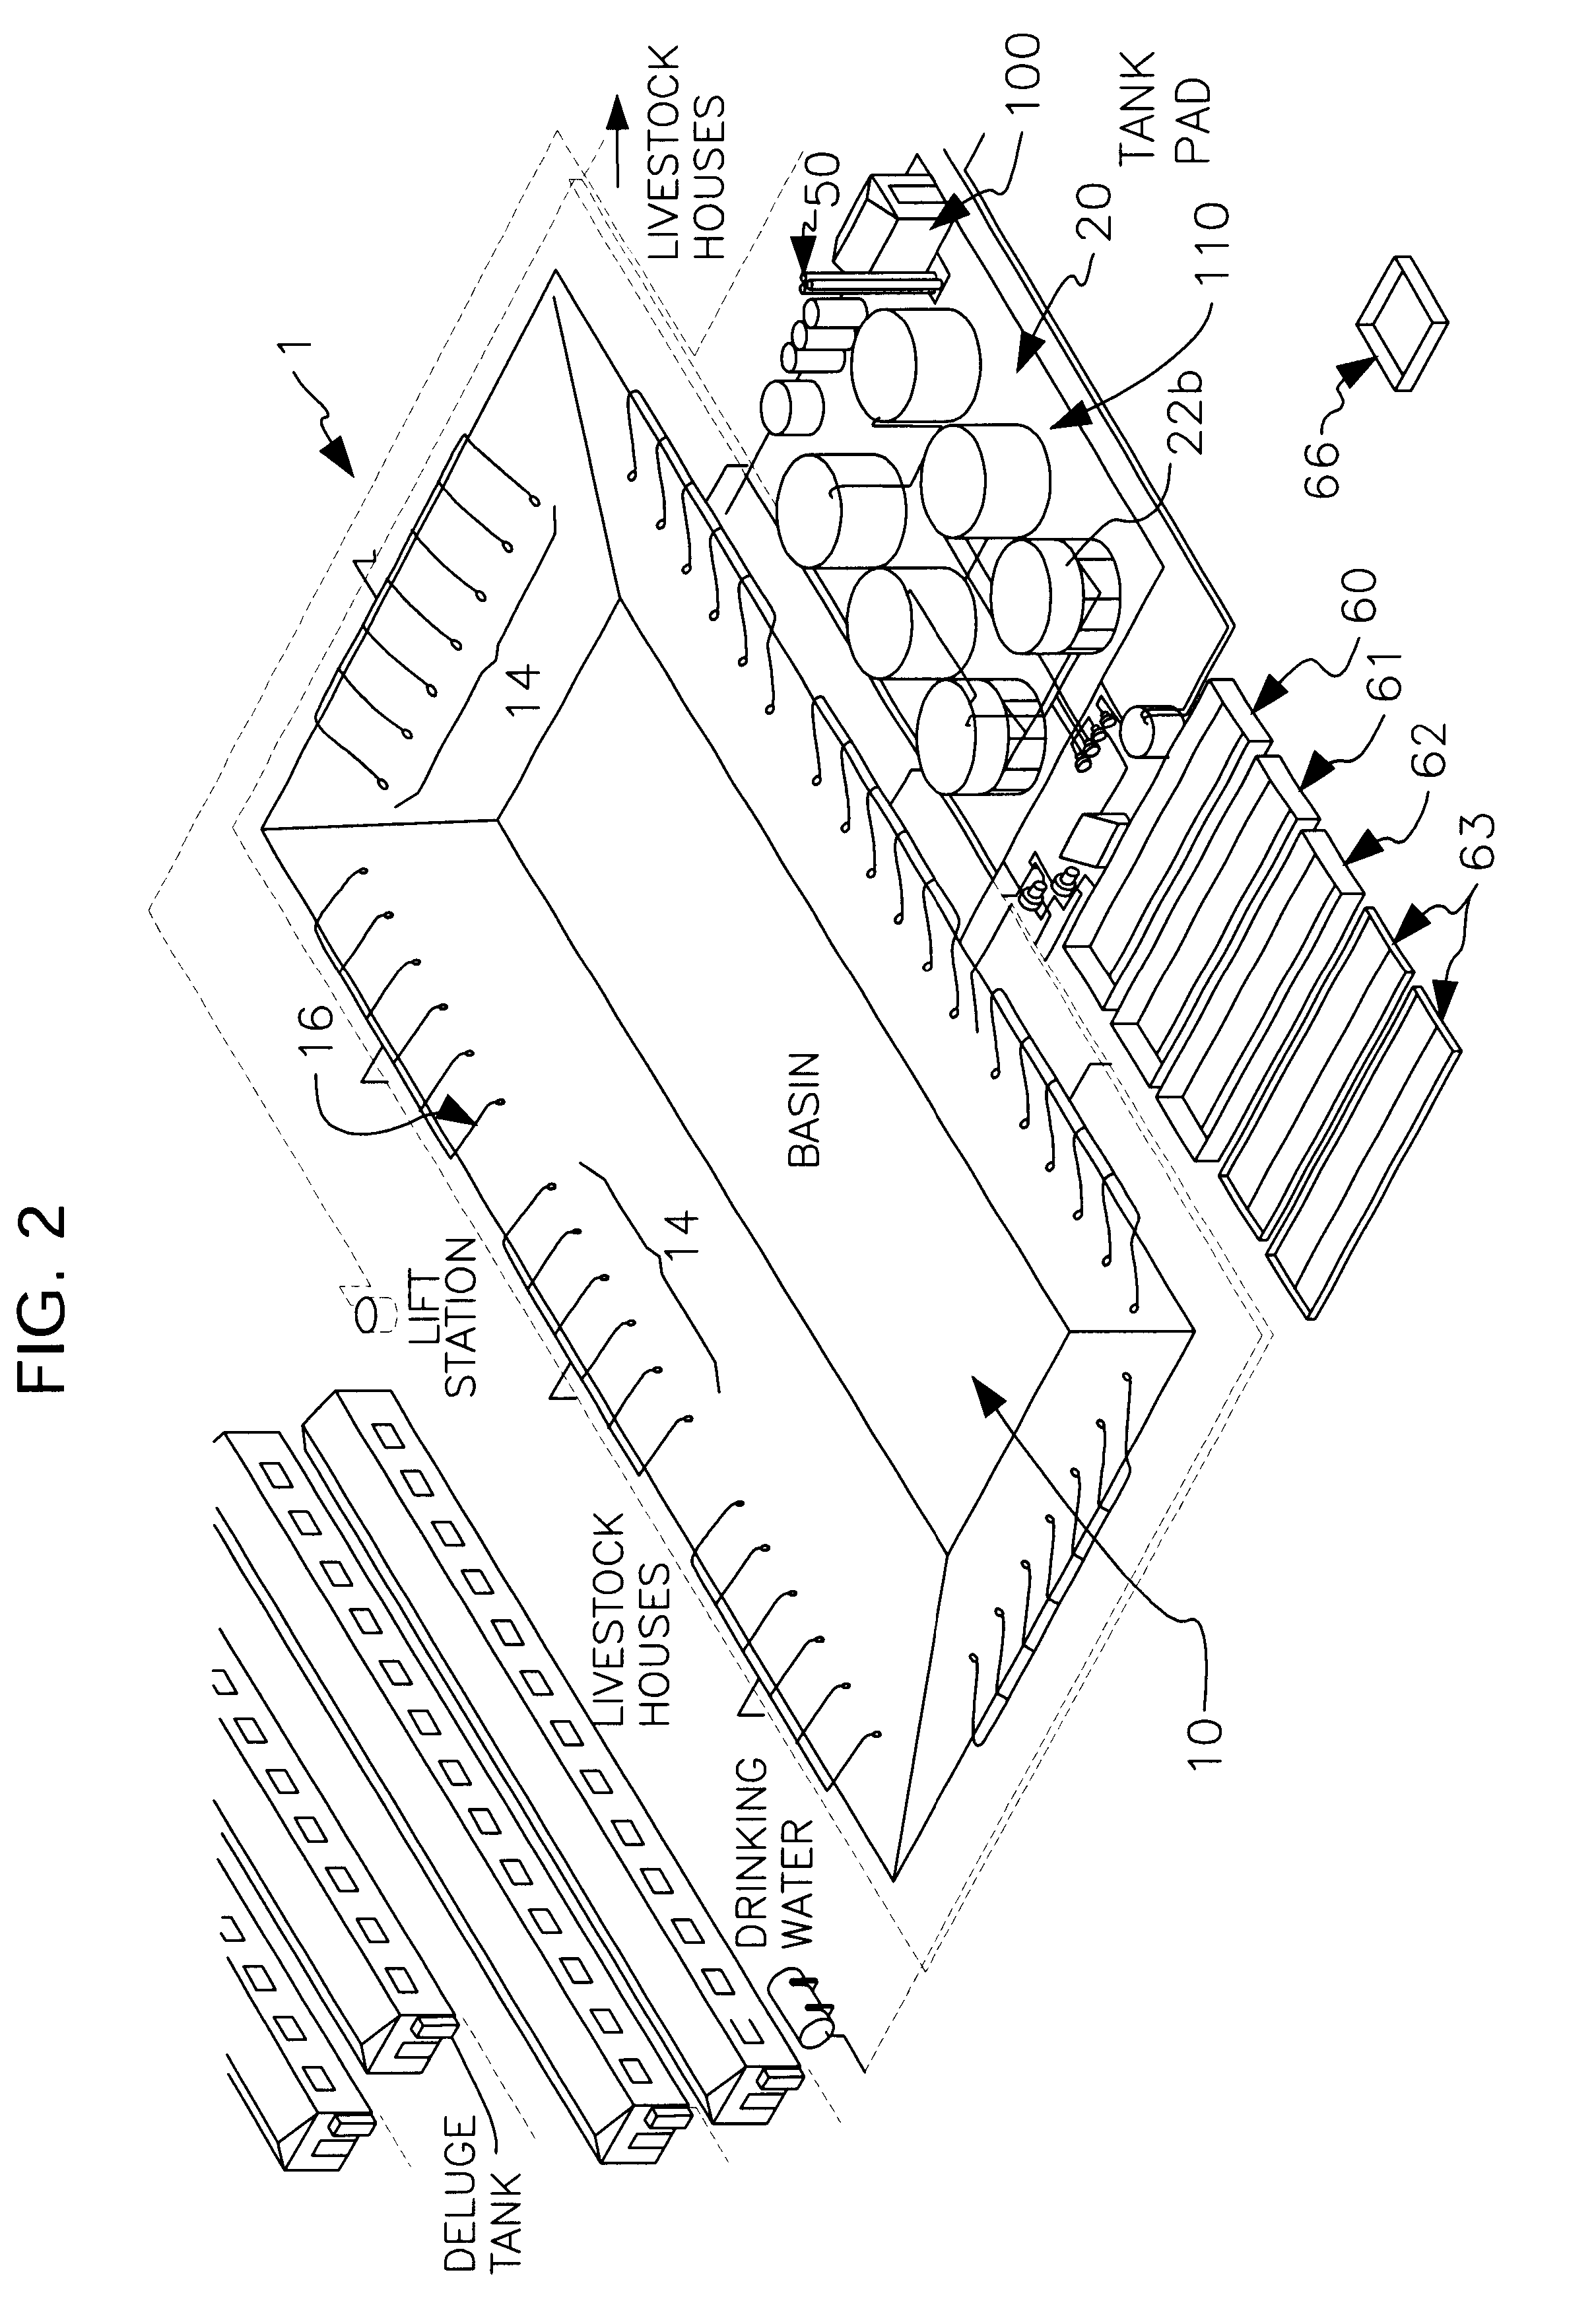 Aerobic treatment of liquids to remove nutrients and control odors